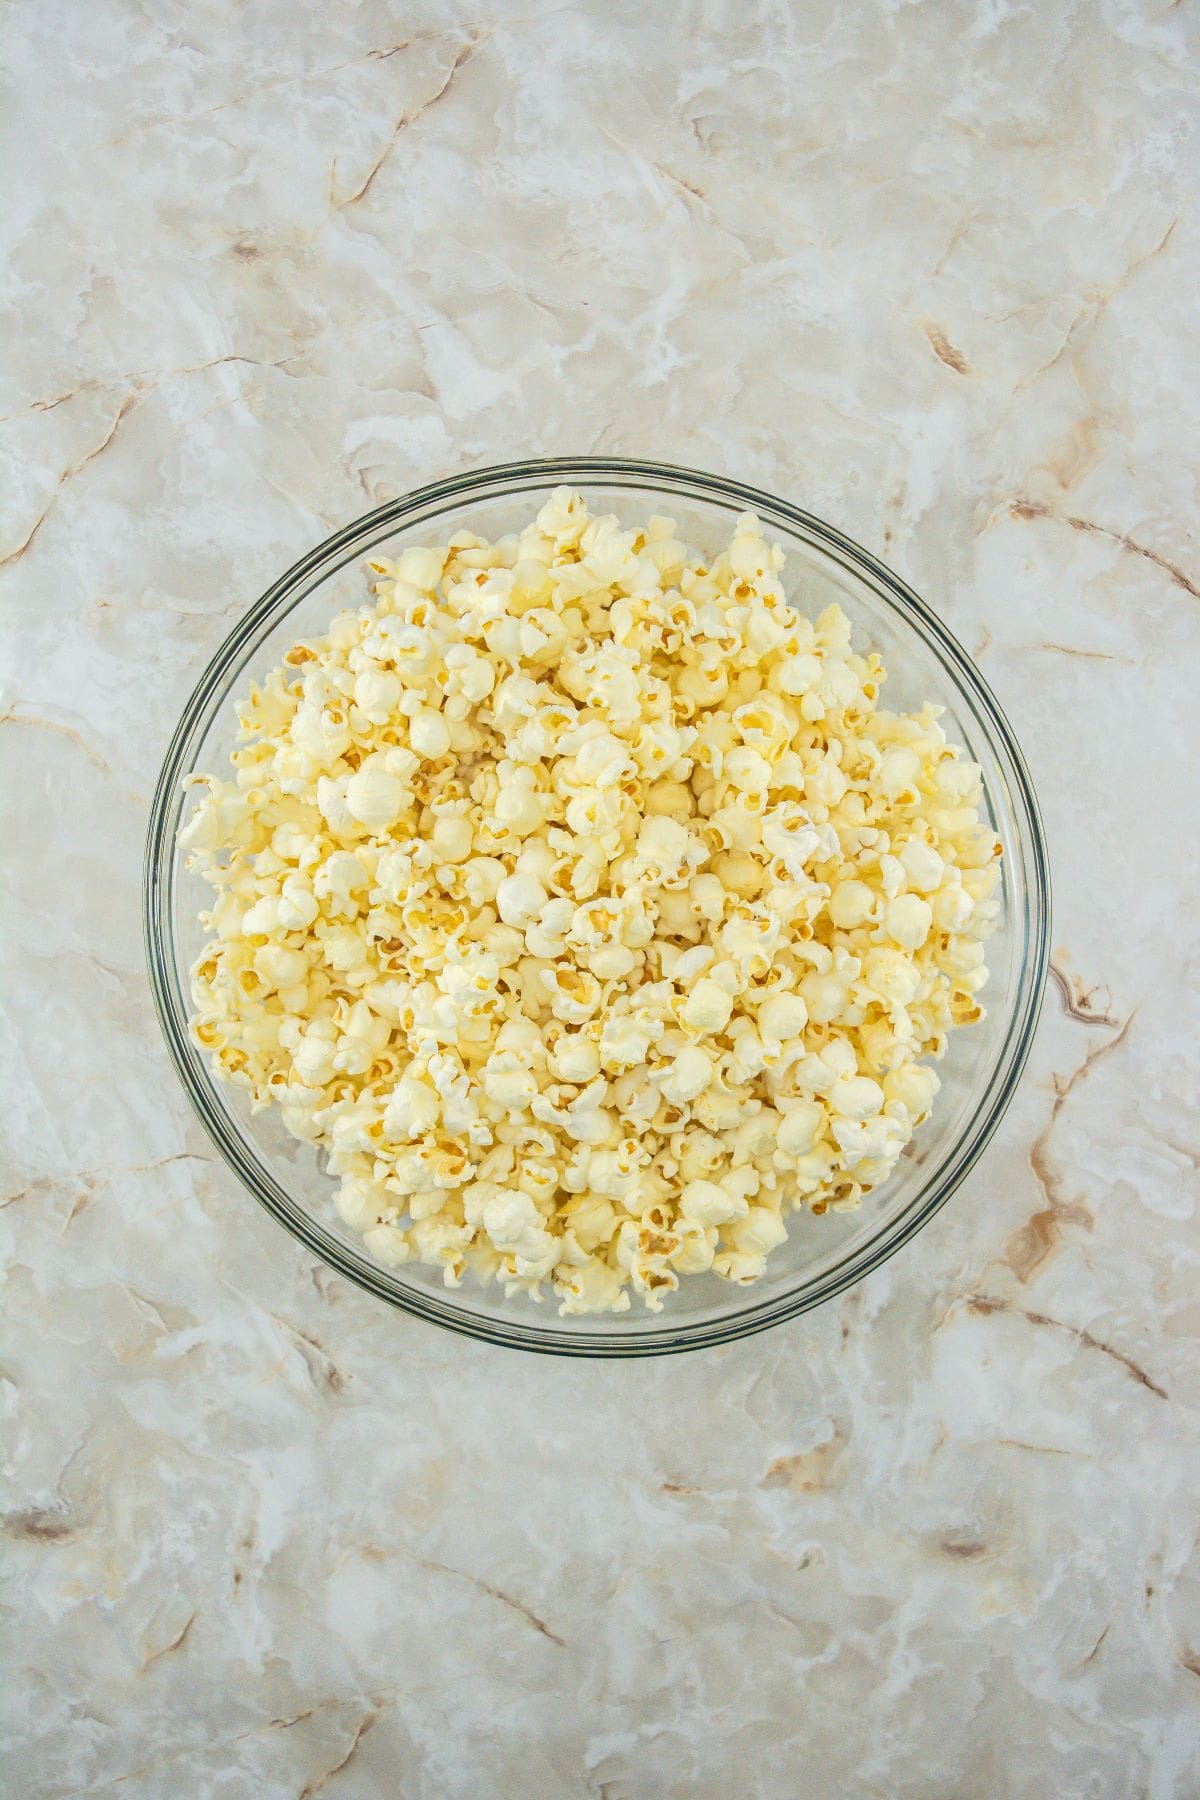 A bowl of freshly popped popcorn on a marble countertop.